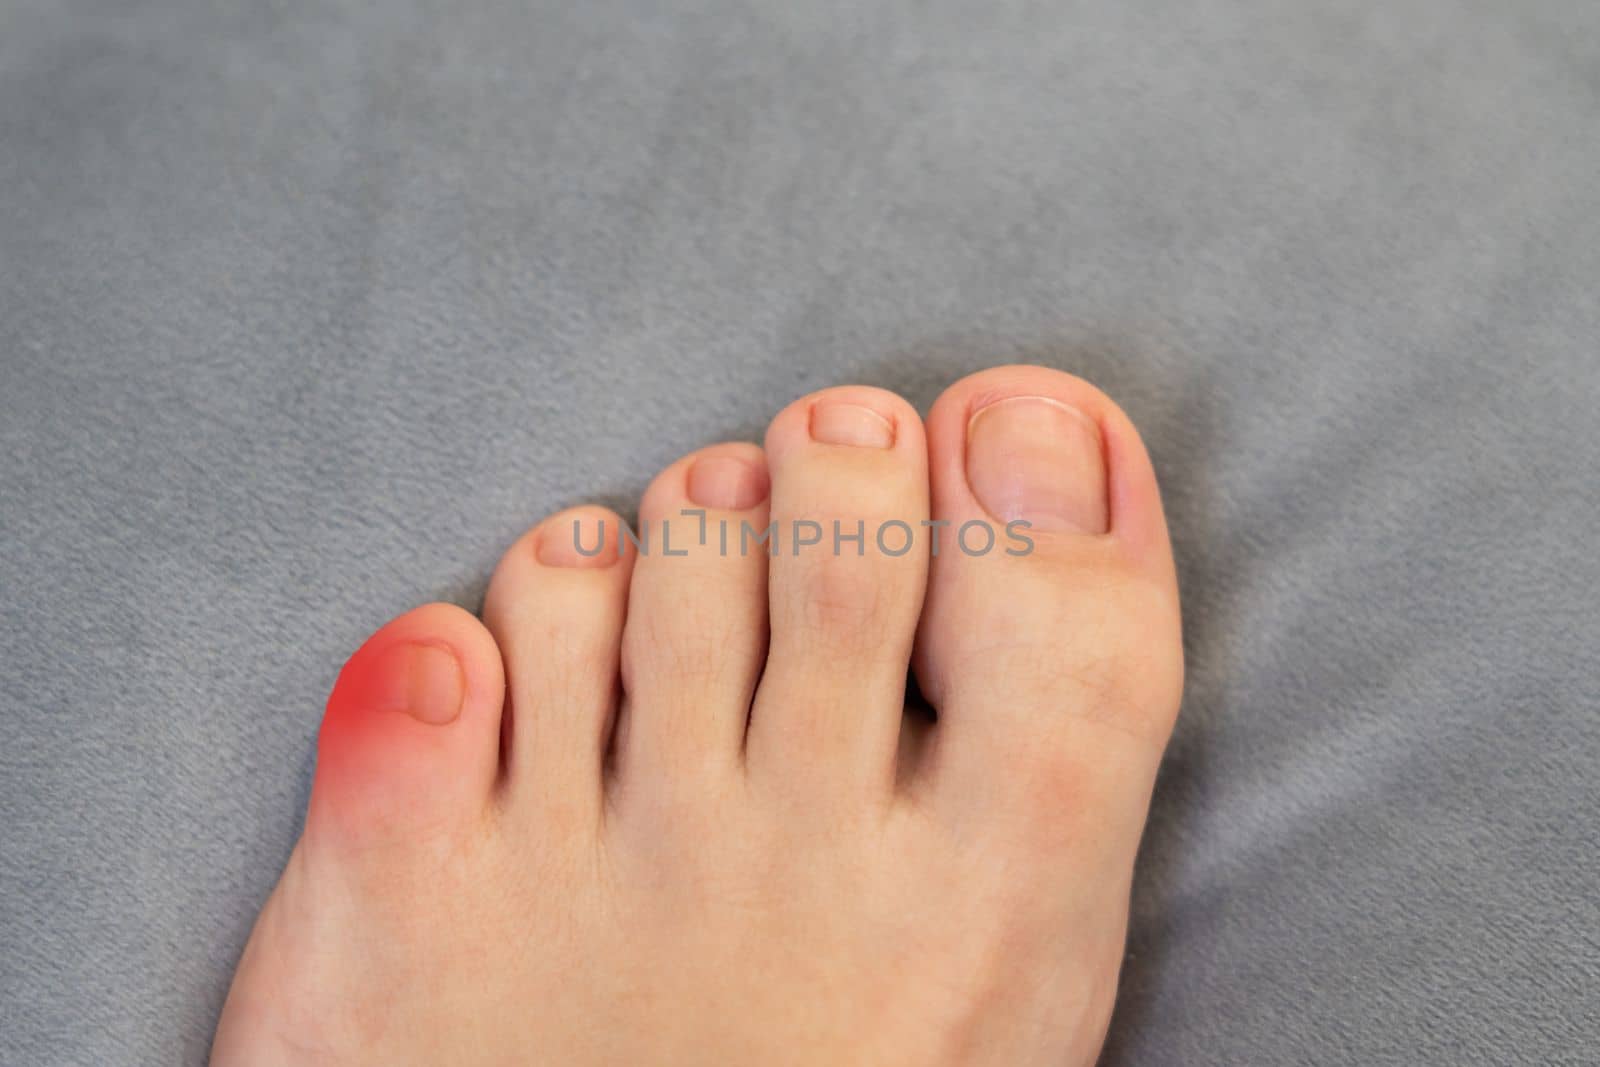 Inflammation on female foot with red spot. Concept of feet disease and pain